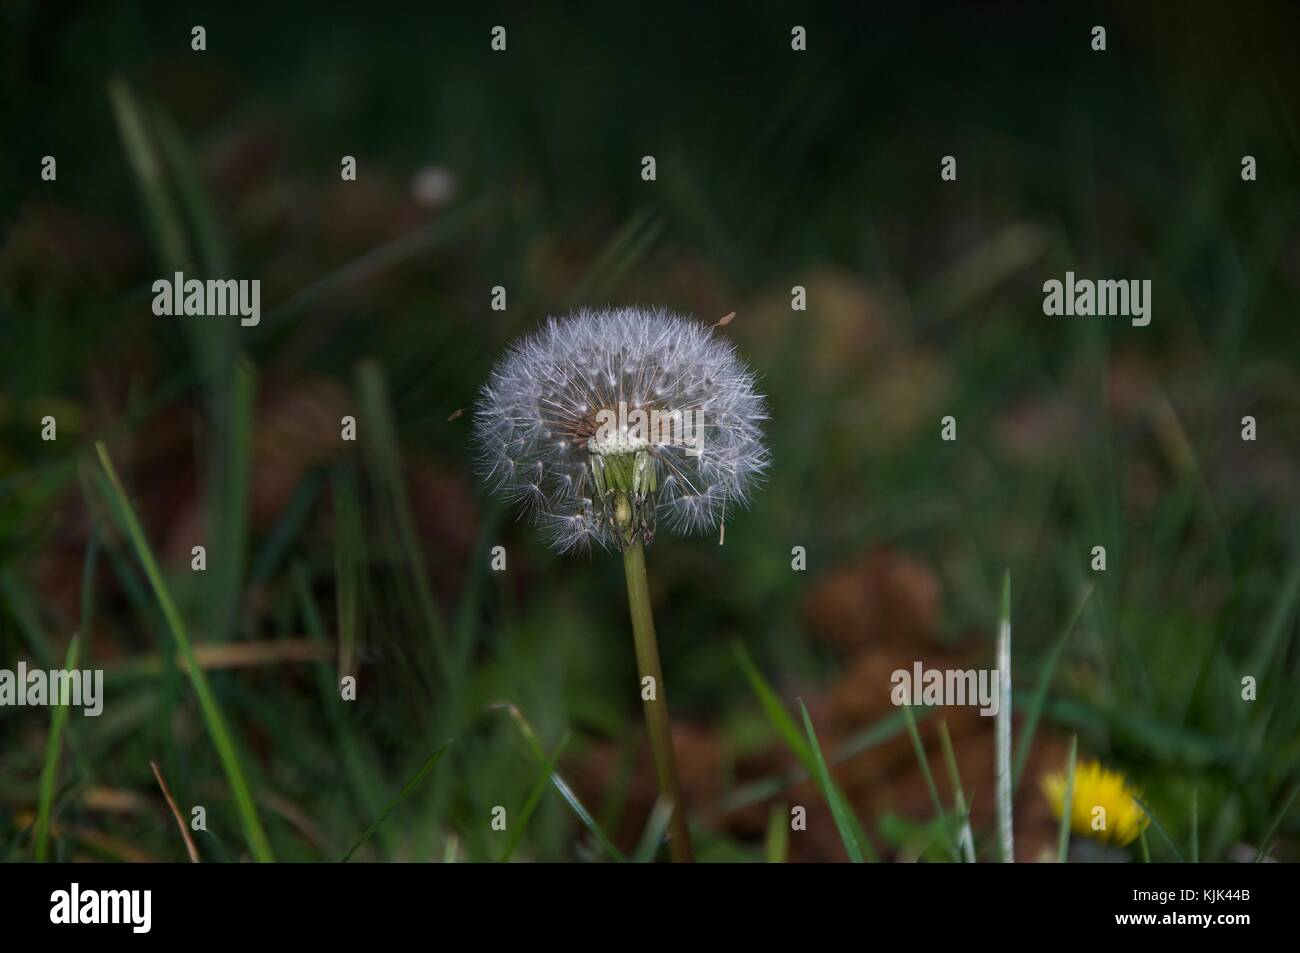 Poor dandelion stands alone in the grass Stock Photo